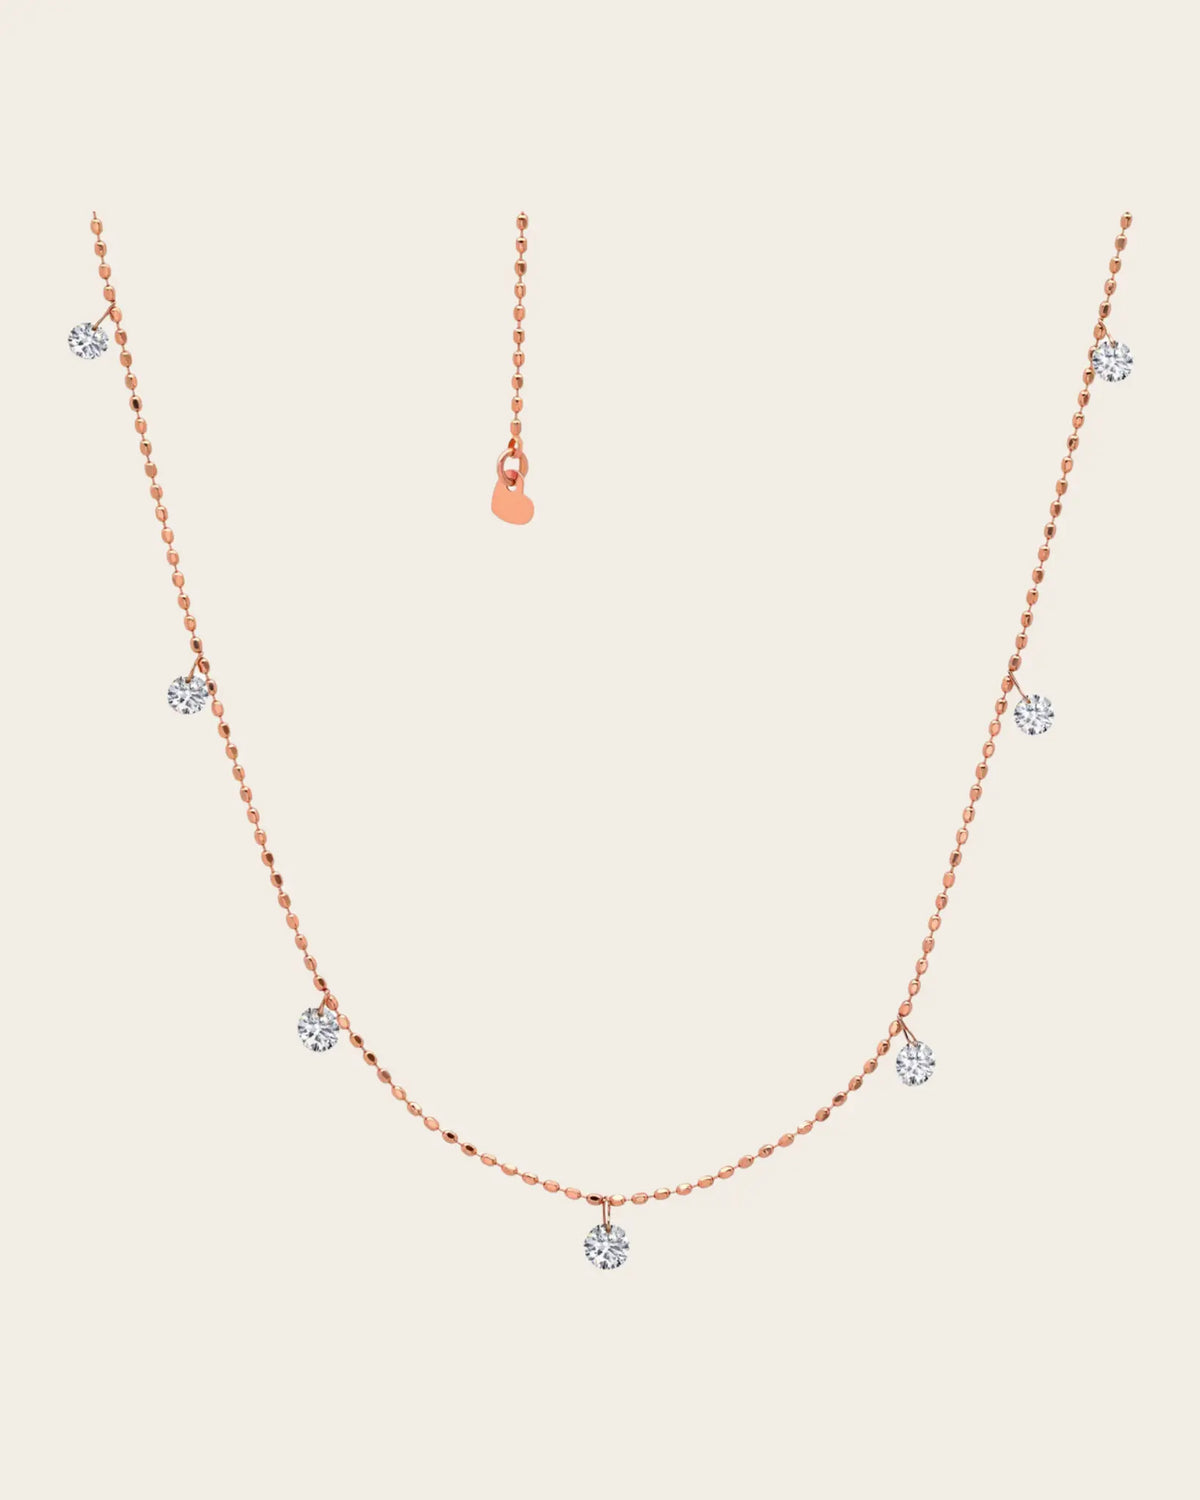 Small Floating Diamond Necklace Small Floating Diamond Necklace Graziela Gems Graziela Gems Rose-Gold Squash Blossom Vail